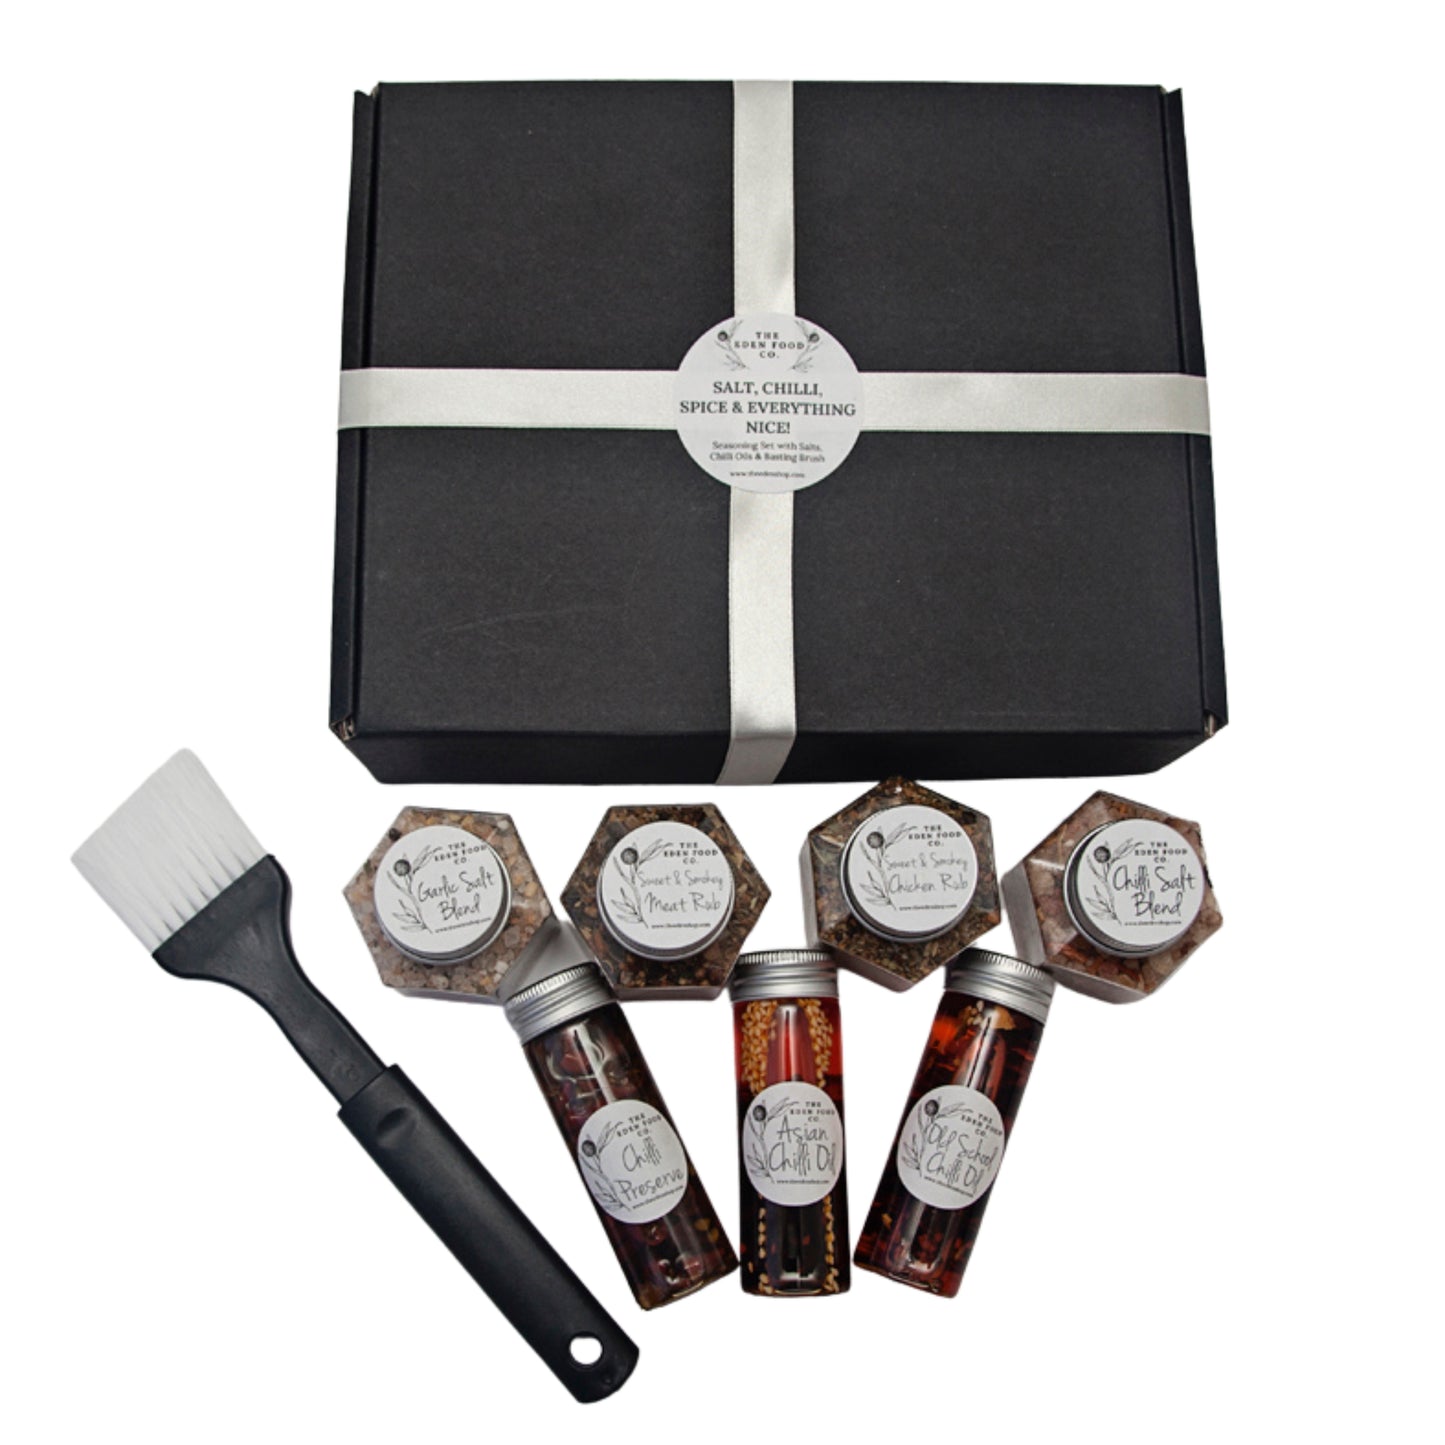 Salt, Chilli, Spice & Everything Nice! Cooking Set